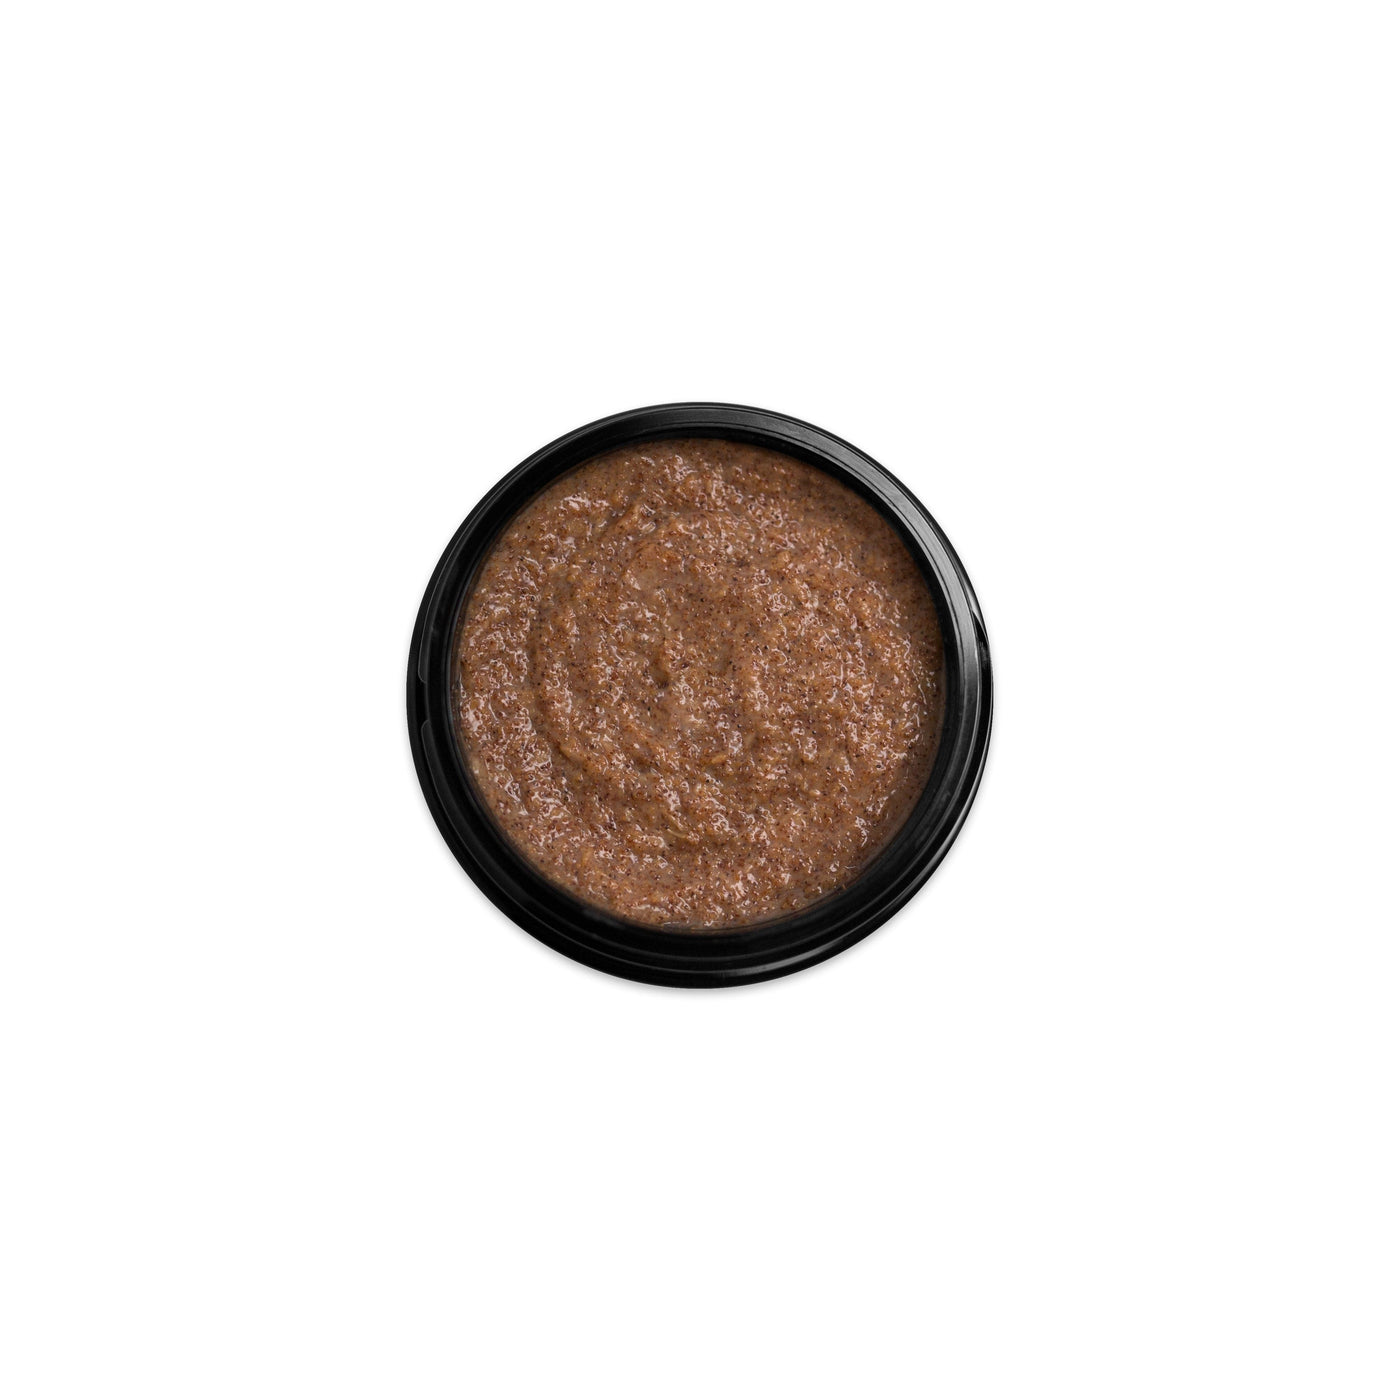 (Product image): Open 1.7oz jar of Assassin deep exfoliating scrub. Product inside is brown with a sandy texture.